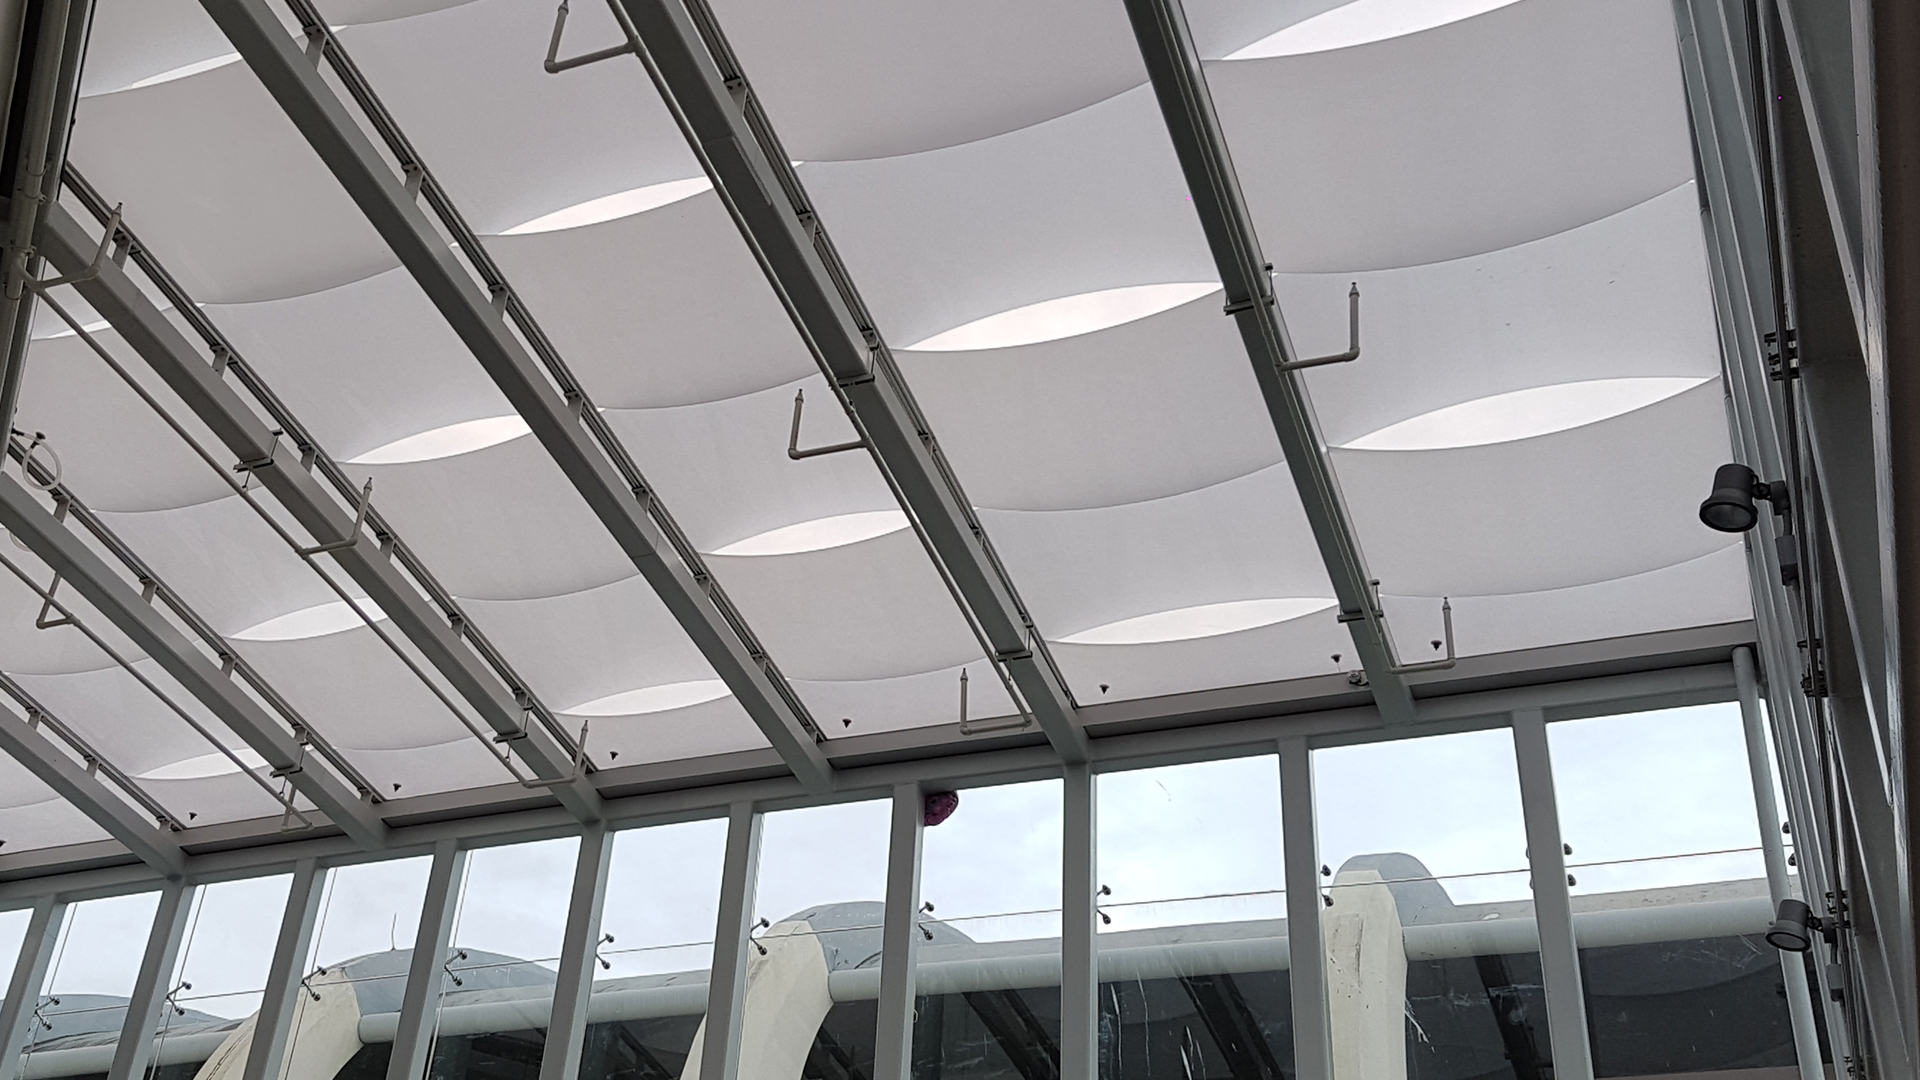 The solution for the connection from Pasir Ris MRT station to White Sands Shopping Mall was a Texlon® ETFE cushion system.